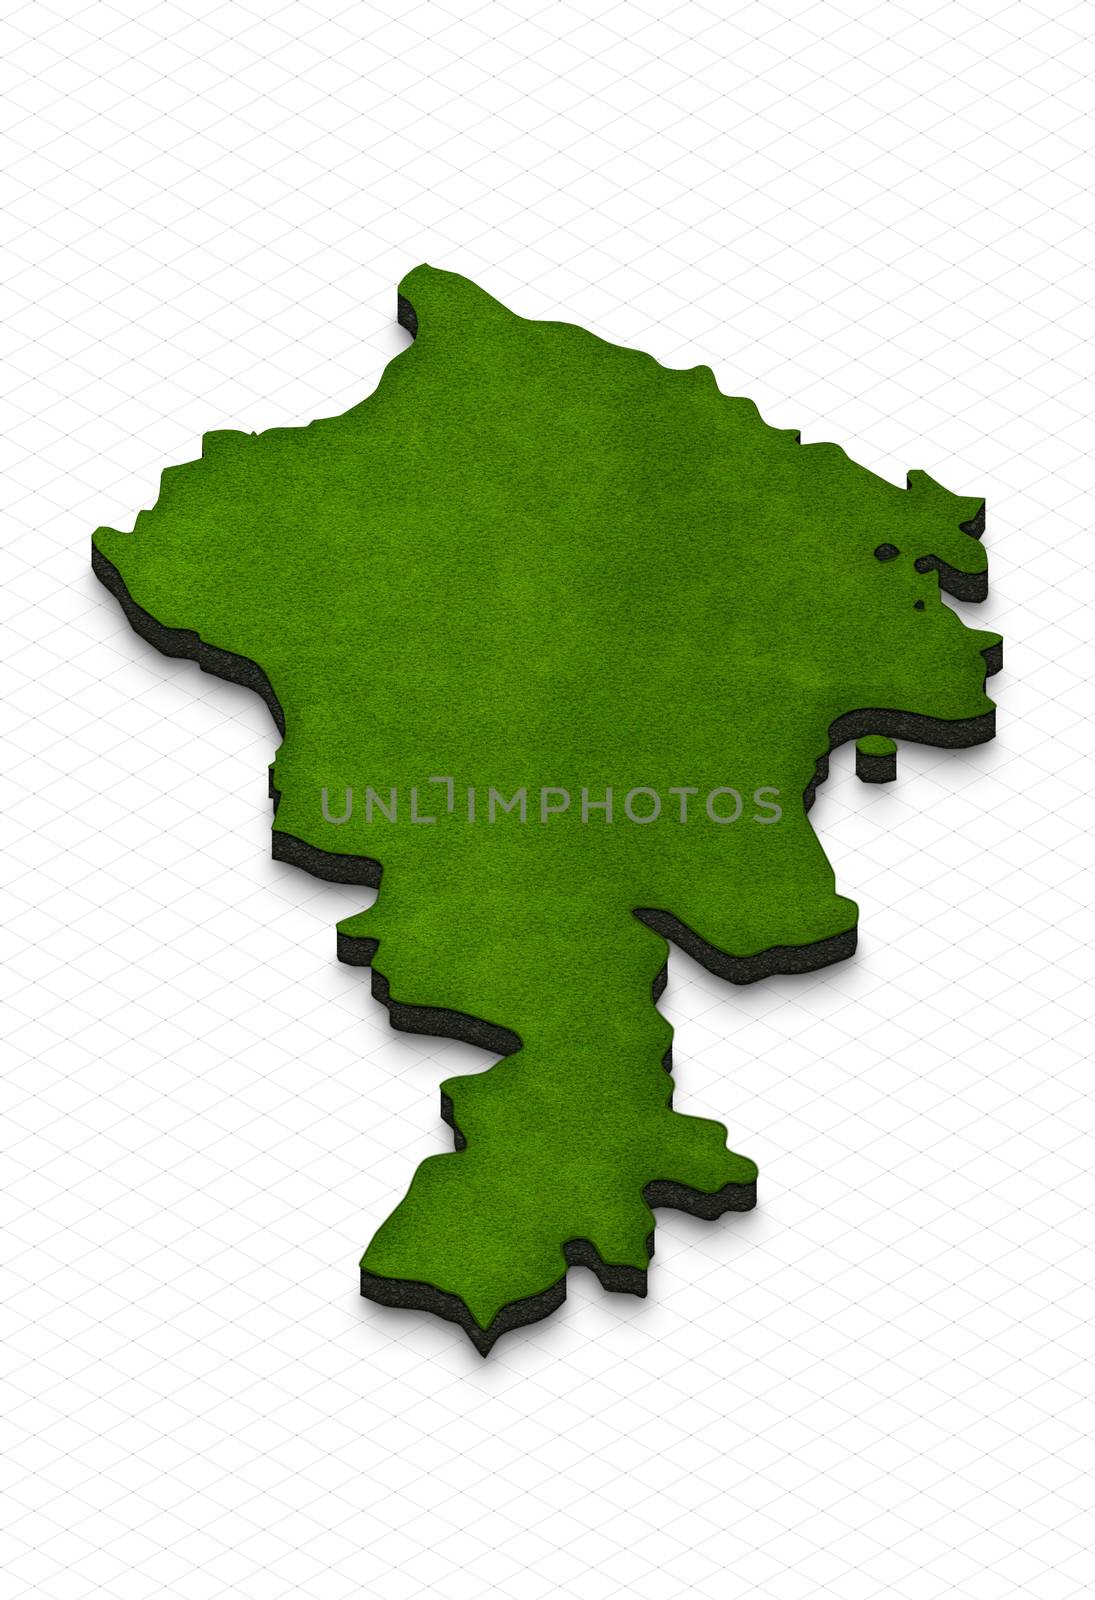 Illustration of a green ground map of Armenia on grid background. Left 3D isometric perspective projection.